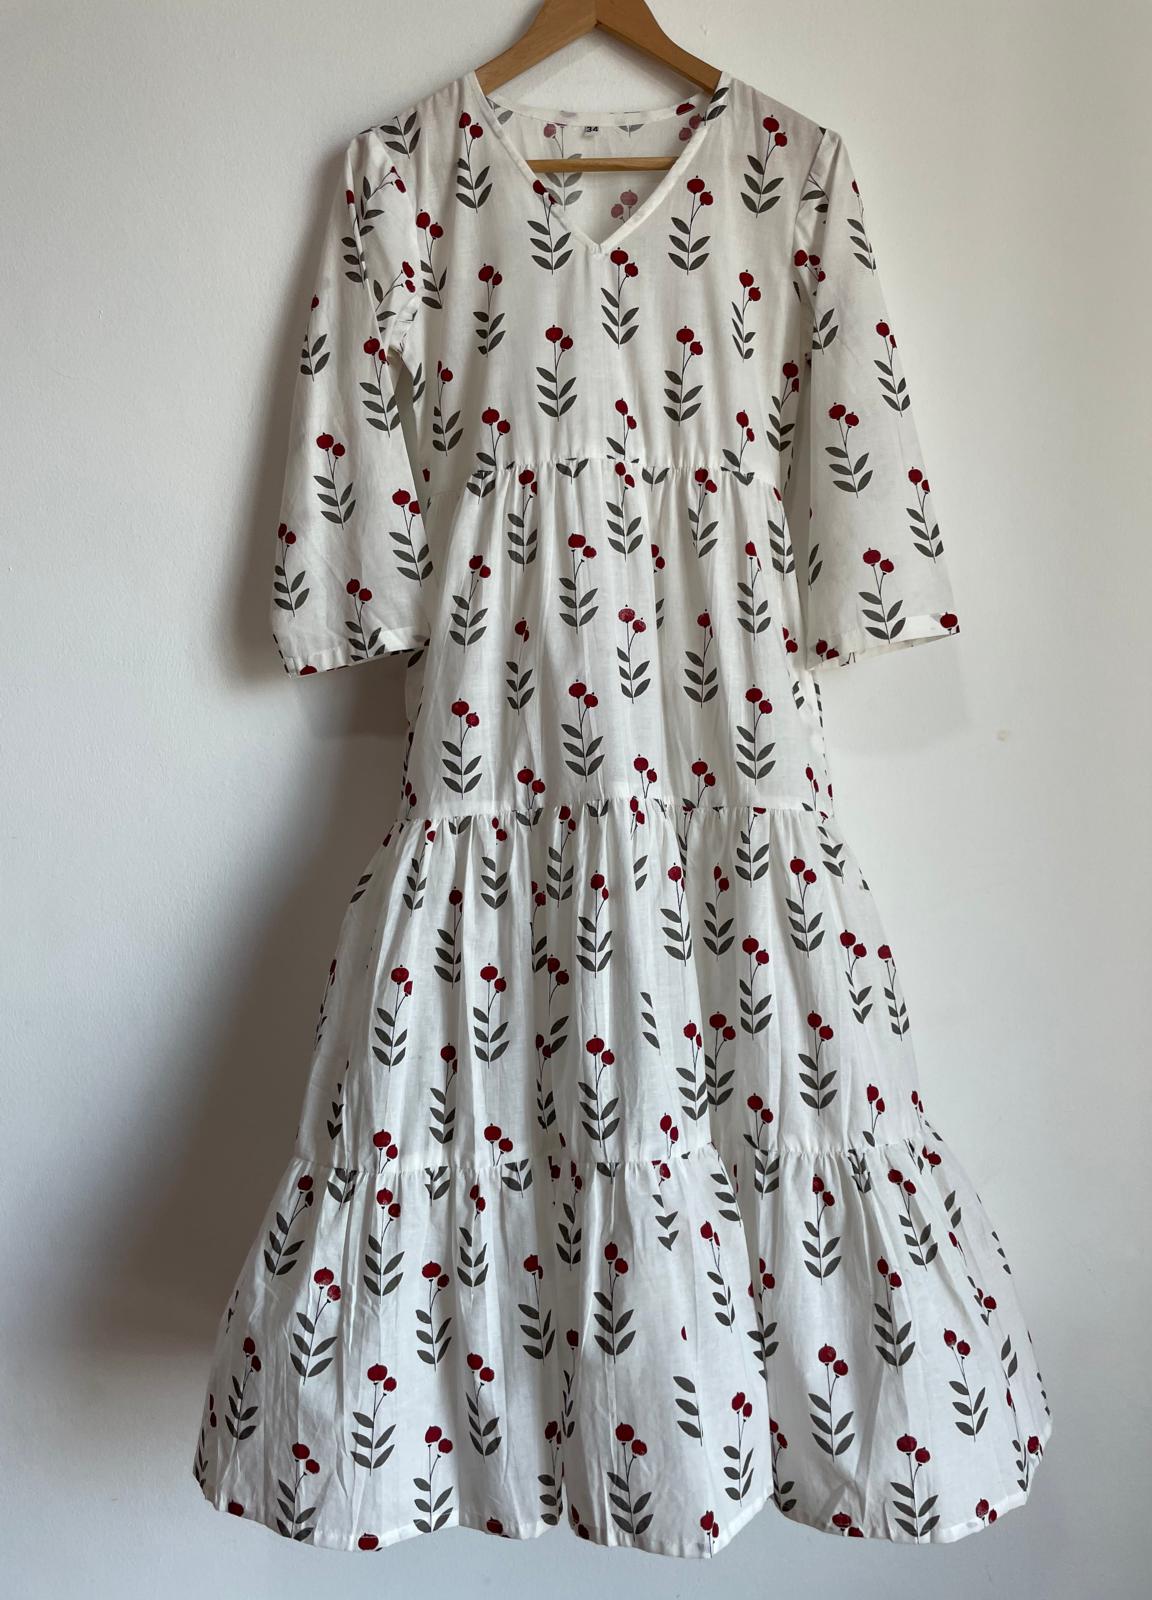 Long white maxi dress for woman in Singapore. Handmade and affordable. Blockprinted